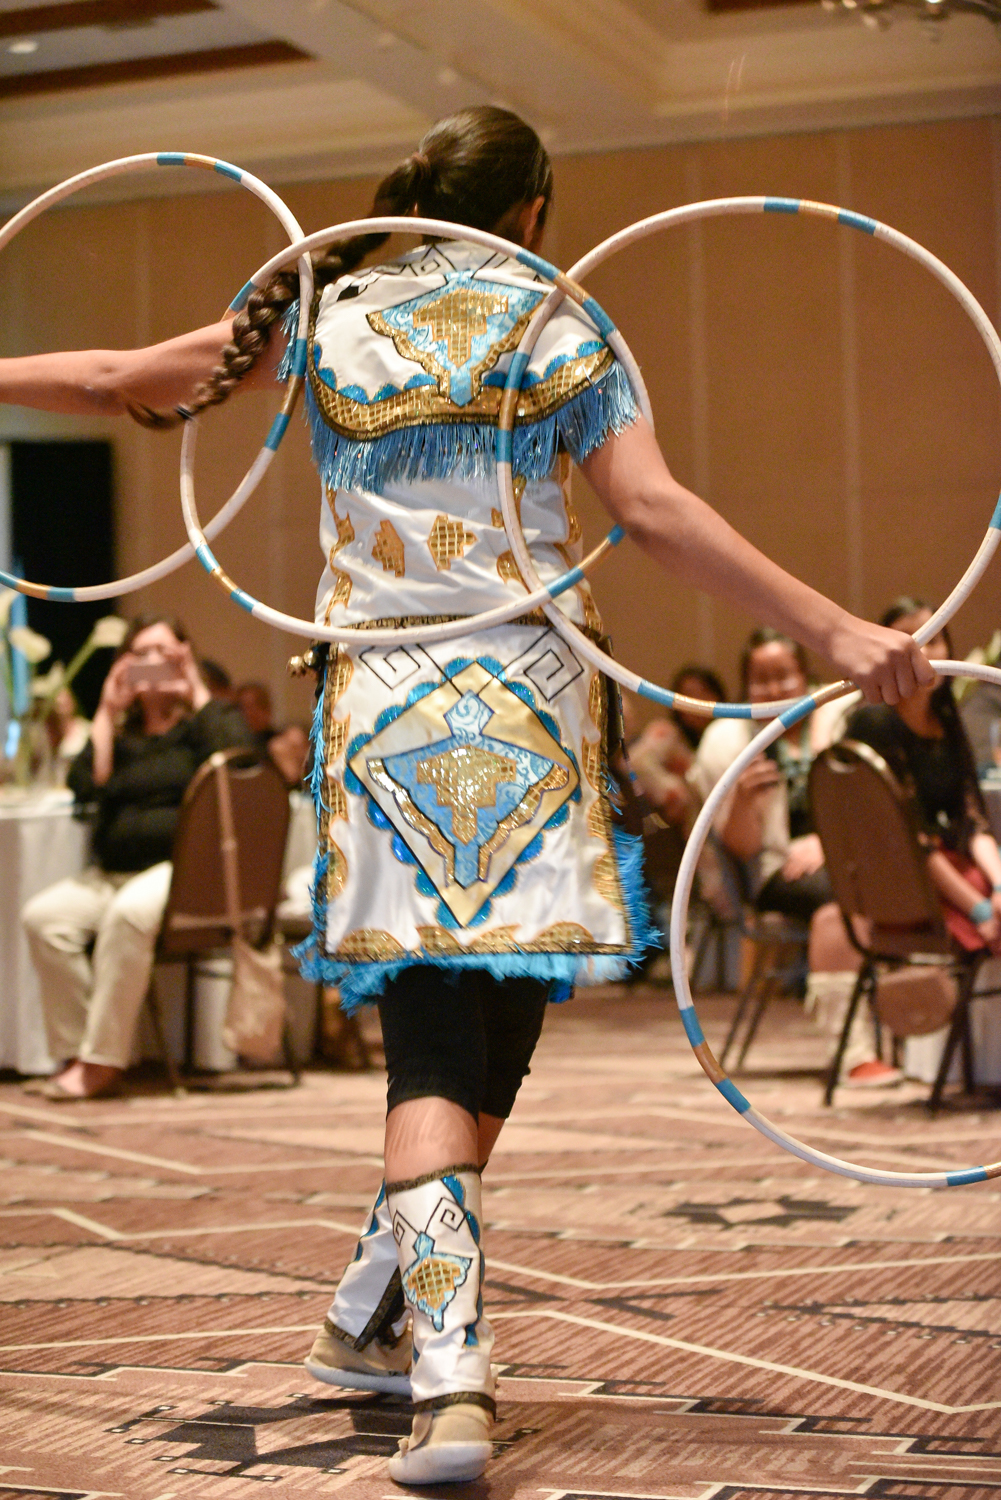 Ms. Sha De Phae Young performing the hoop dance.